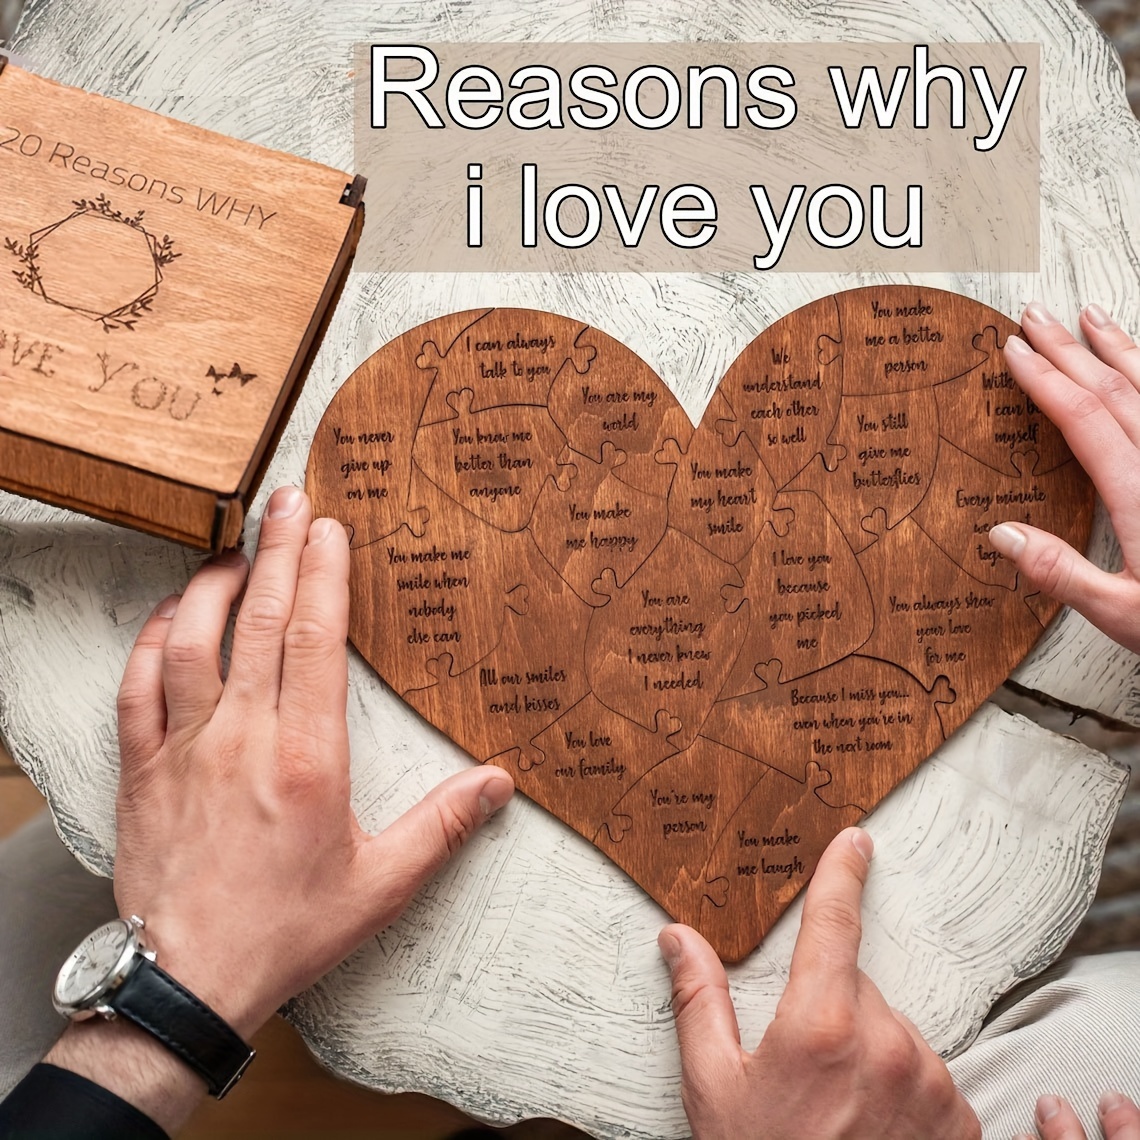 

20 Reasons Why I Love You Wooden Heart Puzzle Valentines Day Gift For Him, Her, Couple - Wedding Anniversary For Wife, Husband - Christmas, Birthday Gifts For Fiance, Boyfriend, Girlfriend